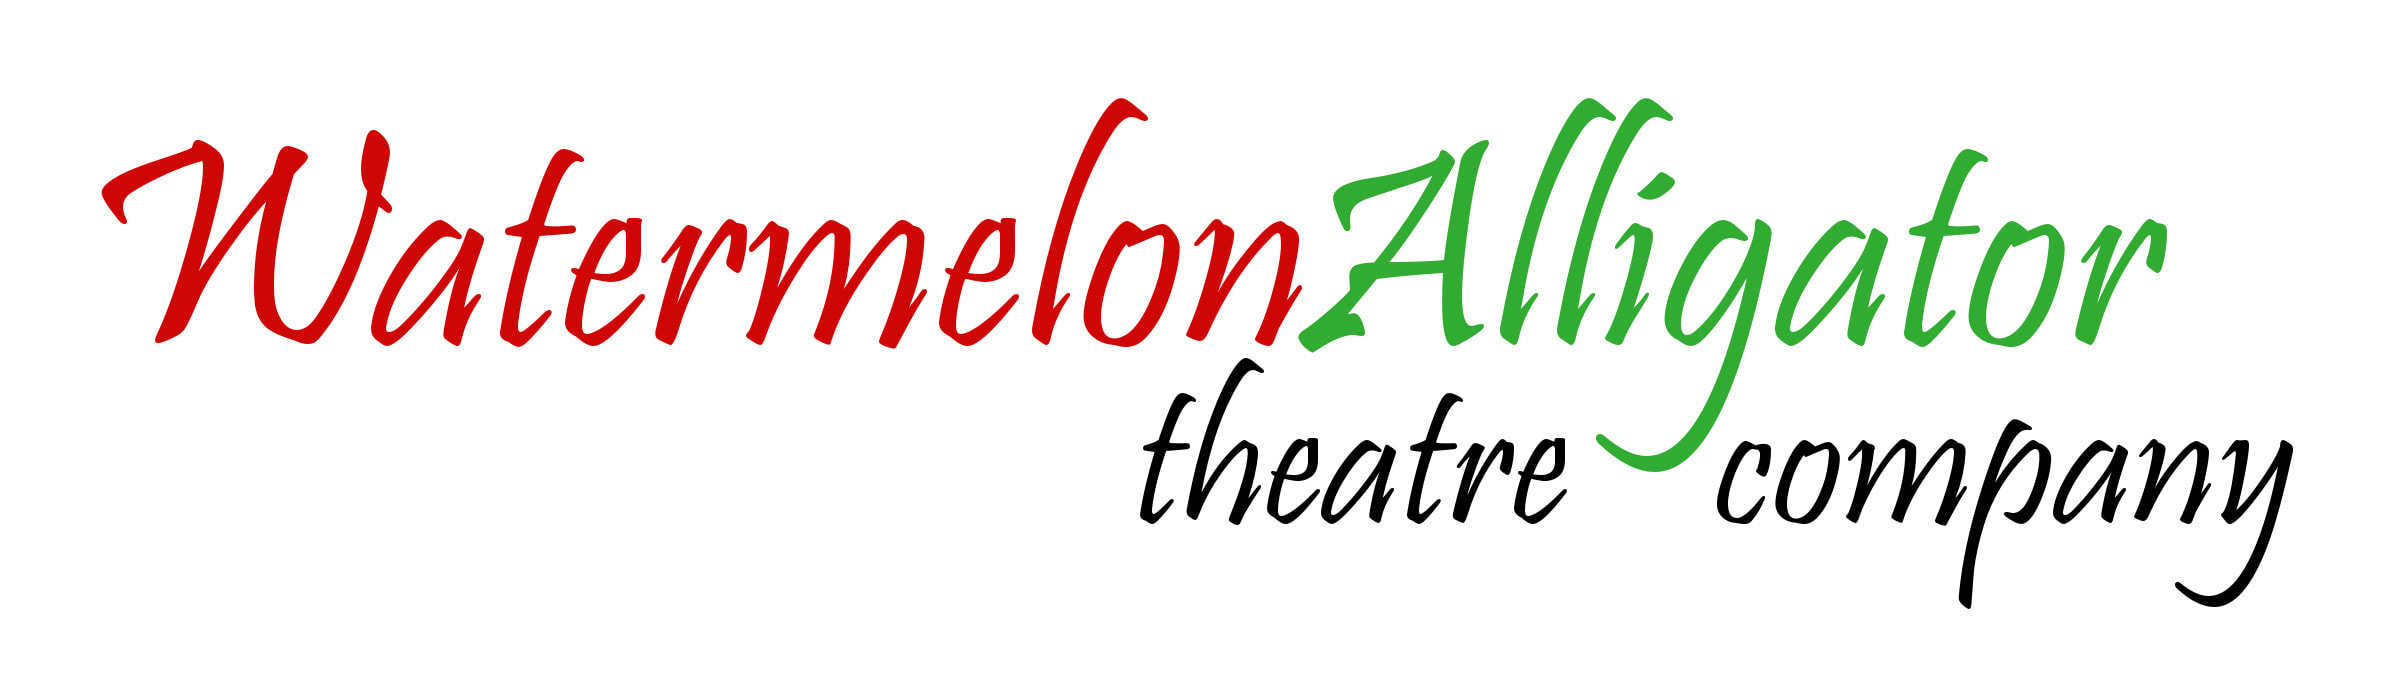 Logo for WatermelonAlligator Theatre Company: Logo is in a calligraphic script called Pristina. The word Watermelon is in red, and the word Alligator is in green; both are in font size 300. On a second line beneath that are the words 